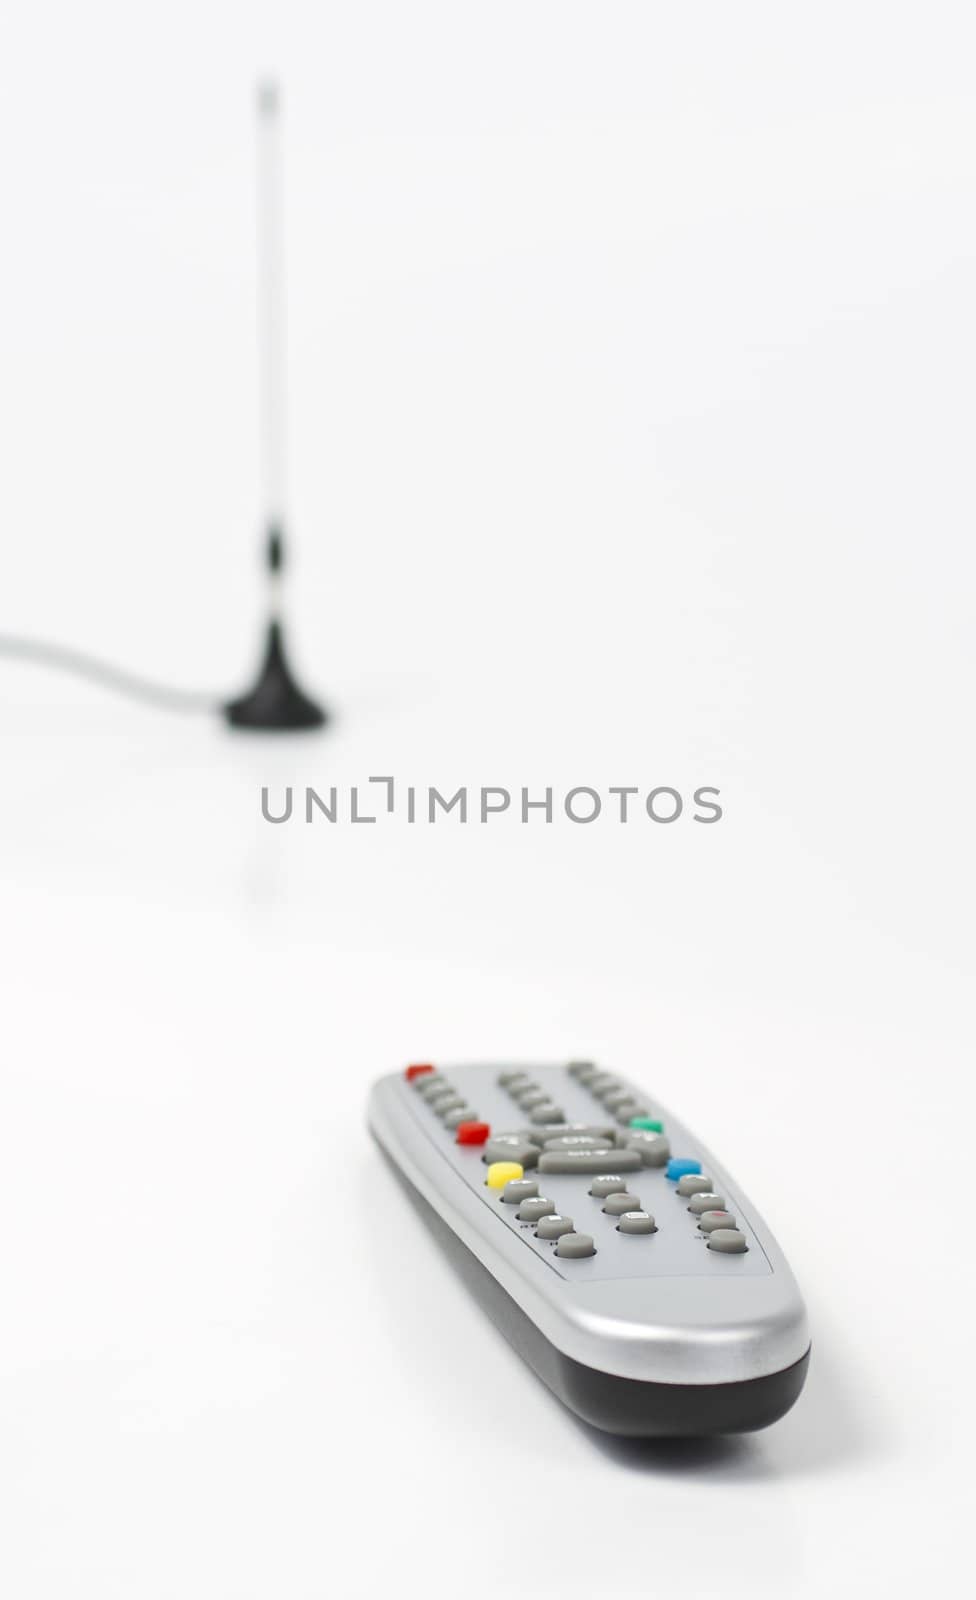 plastic remote control and antenna in backround. Depth of field. Colored keys on remote control